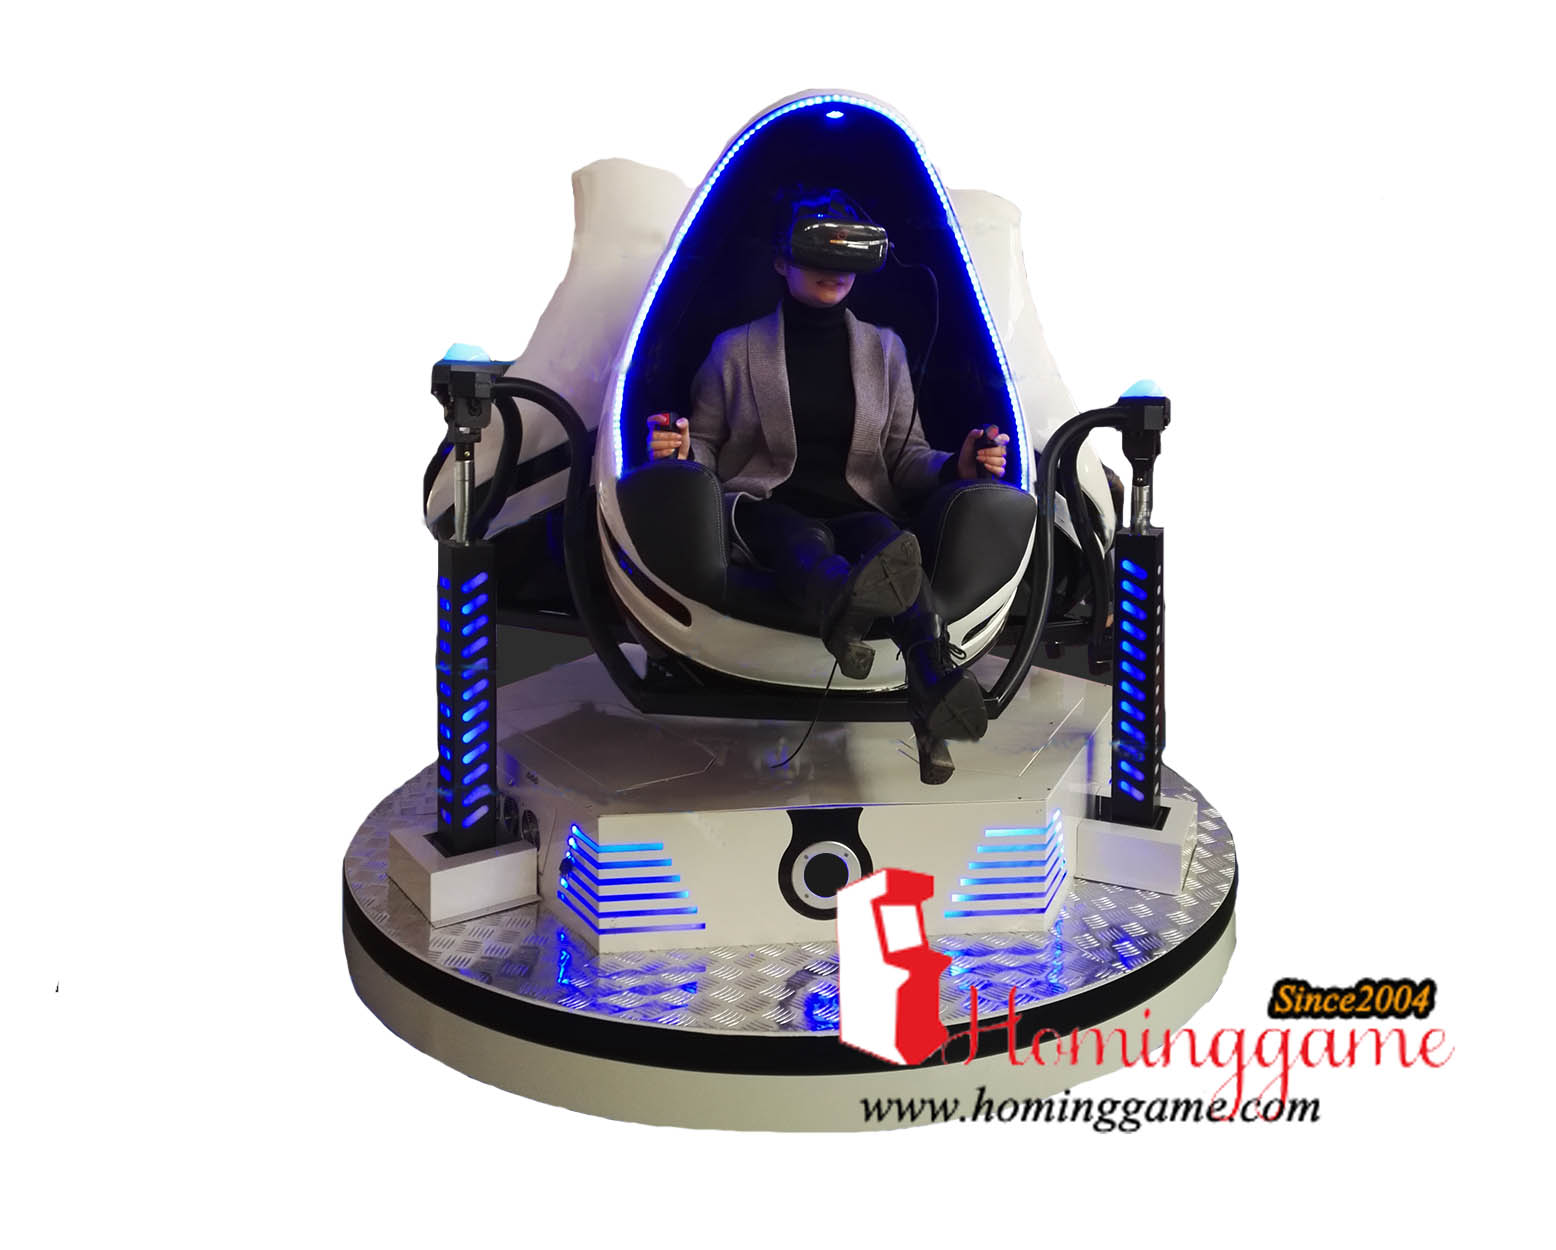 HomingGame Hot Sale 2 Seats 9D VR Egg Reality Cinema Video Arcade Game 